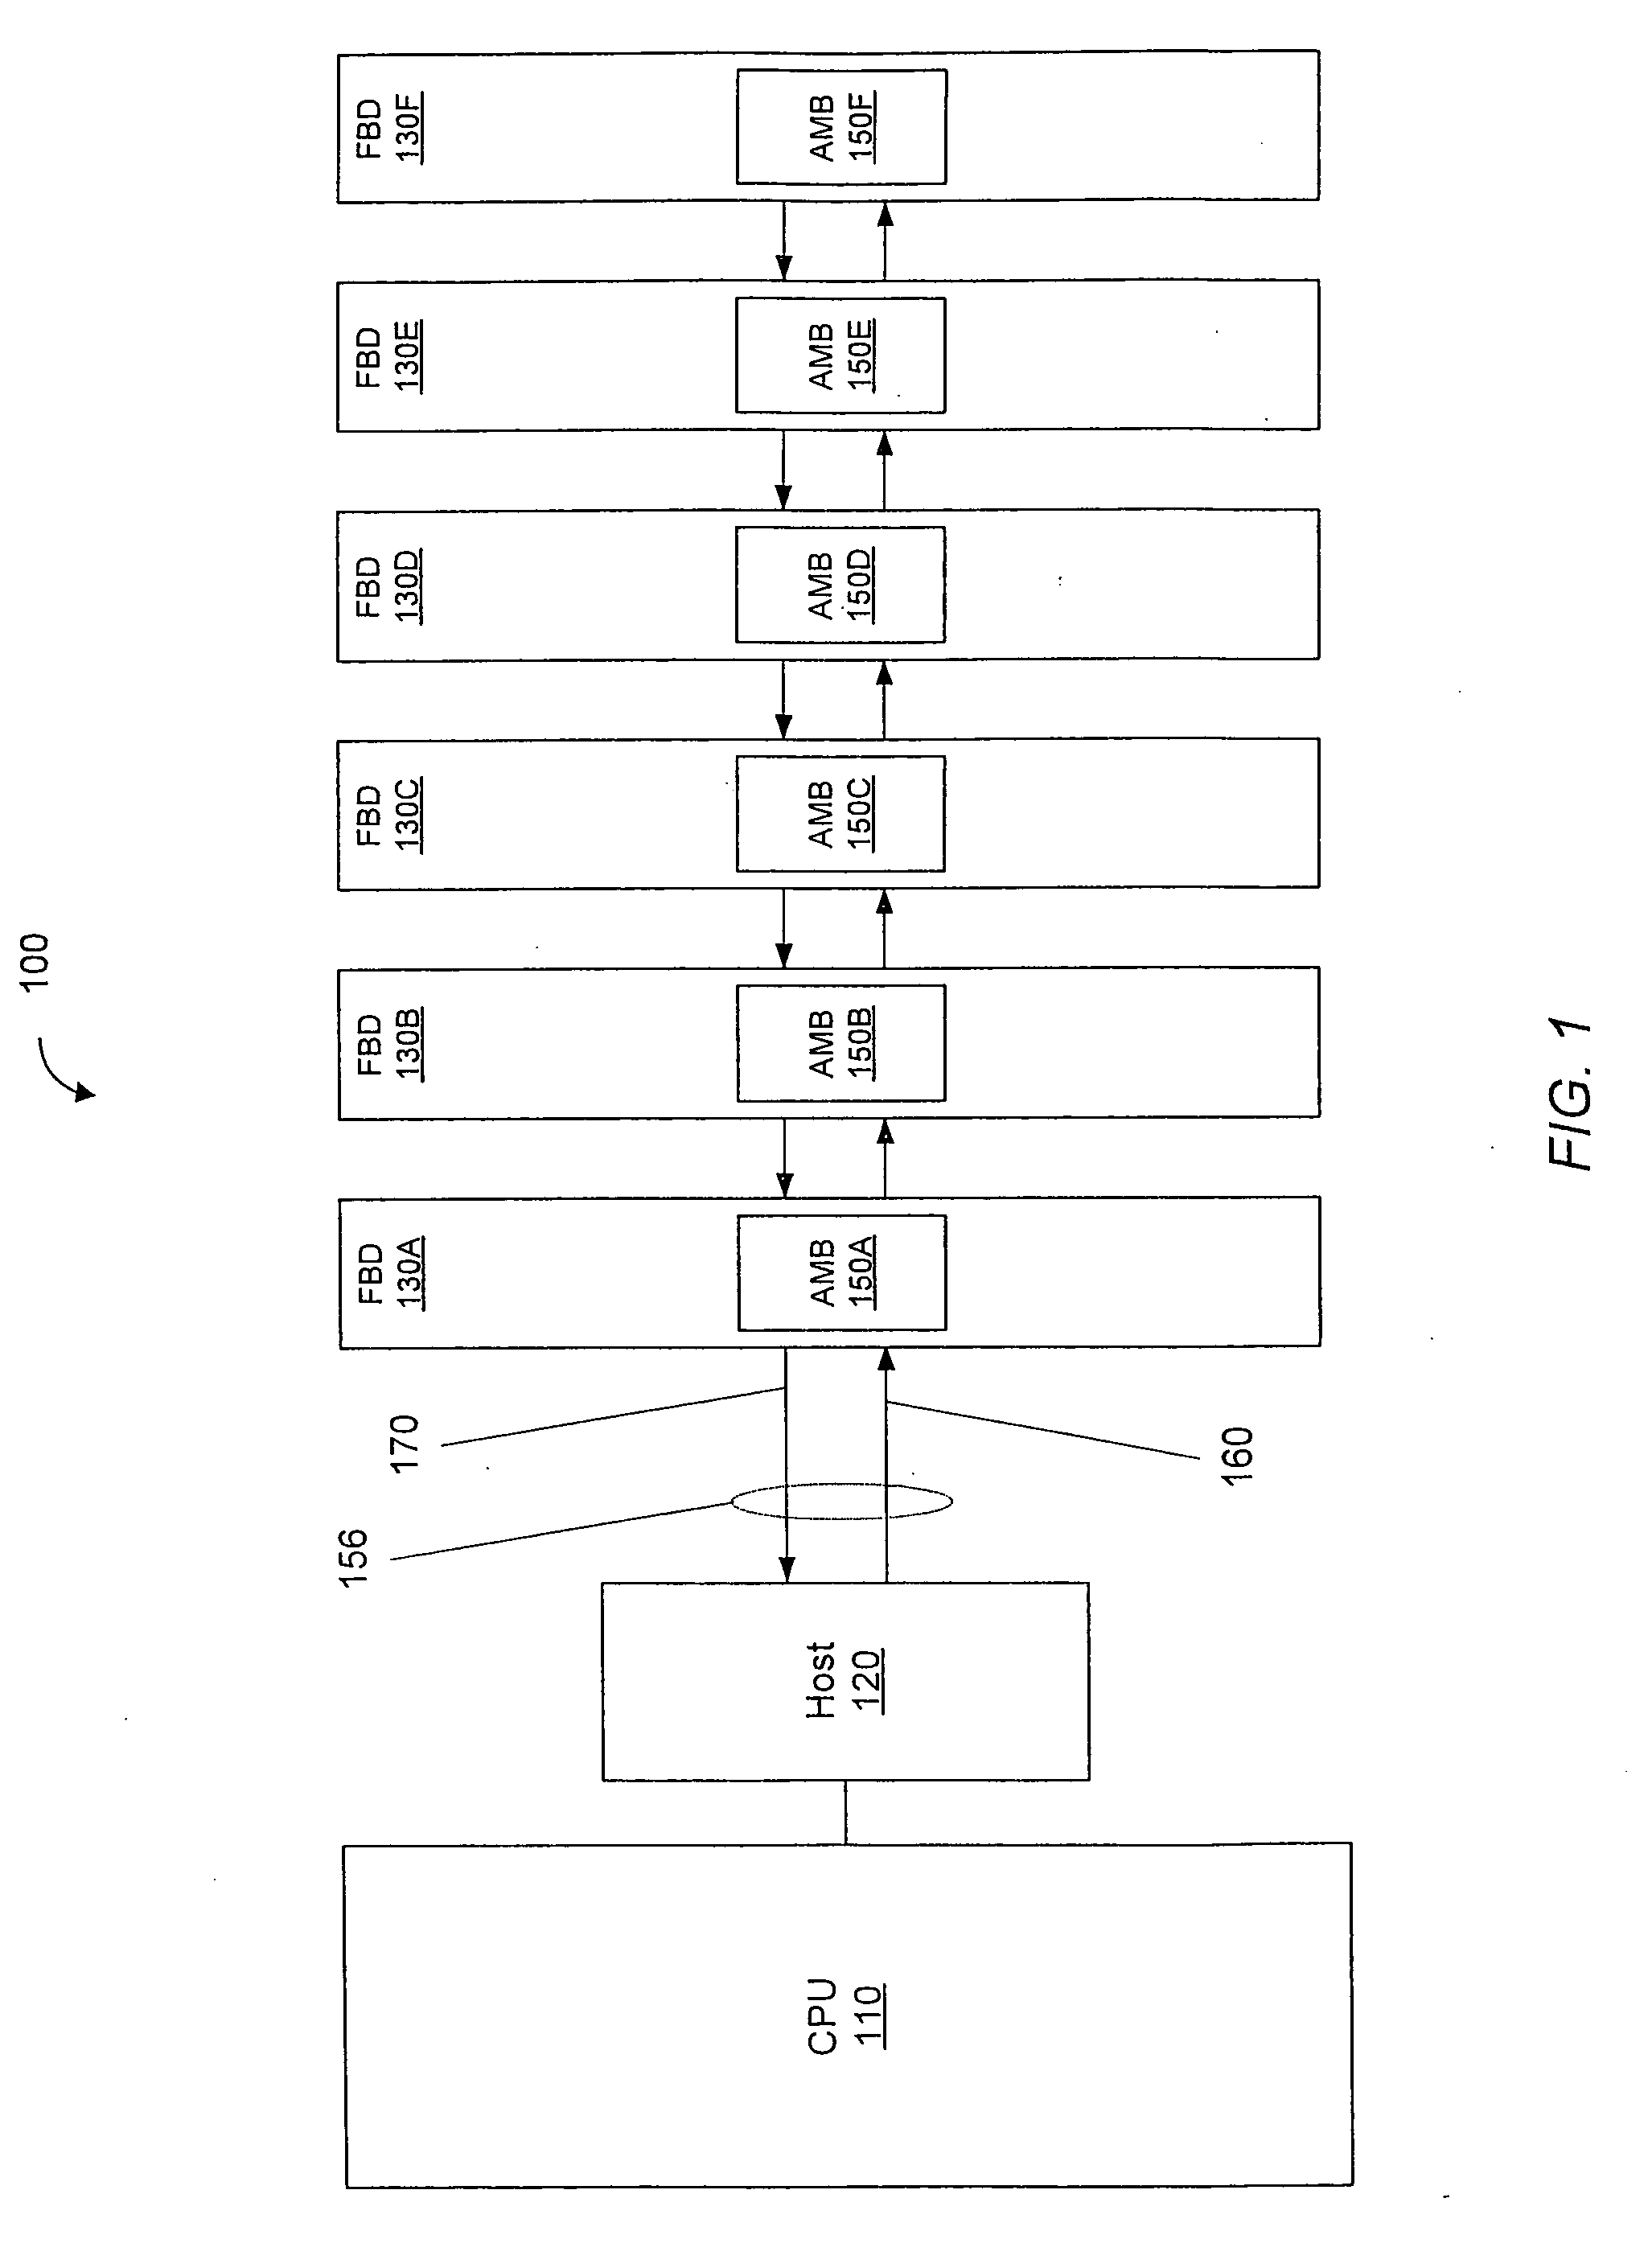 System memory board subsystem using dram with stacked dedicated high speed point to point links